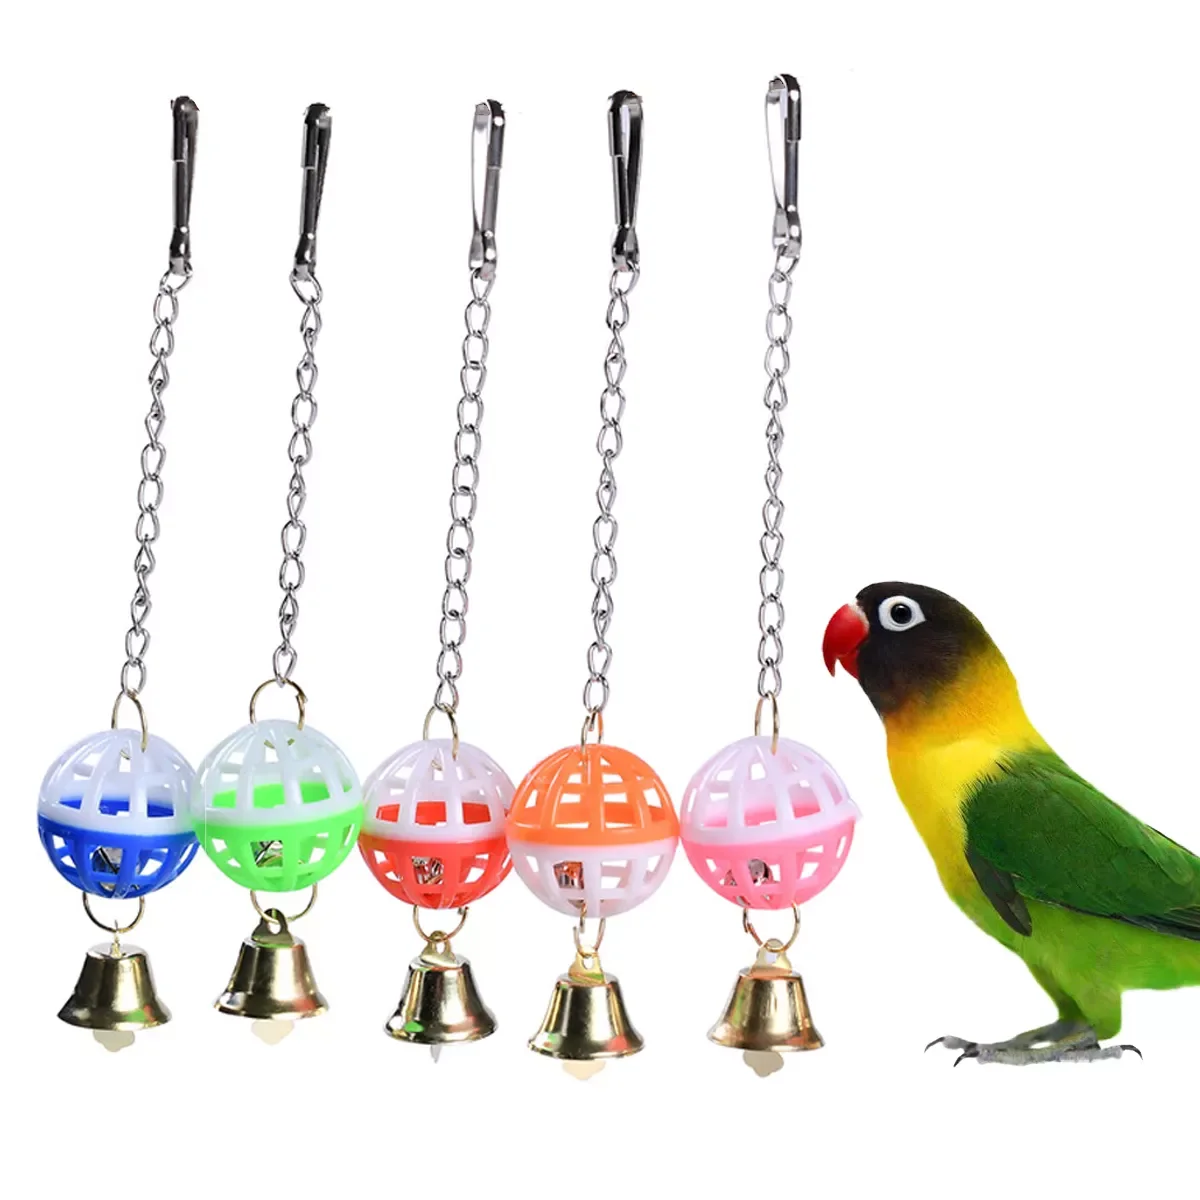 

Colorful Bird Swing Toys With Bell Hanging Toy Bird Parrot Toy For Budgie Lovebirds Conures Small Parakeet Cages Decor